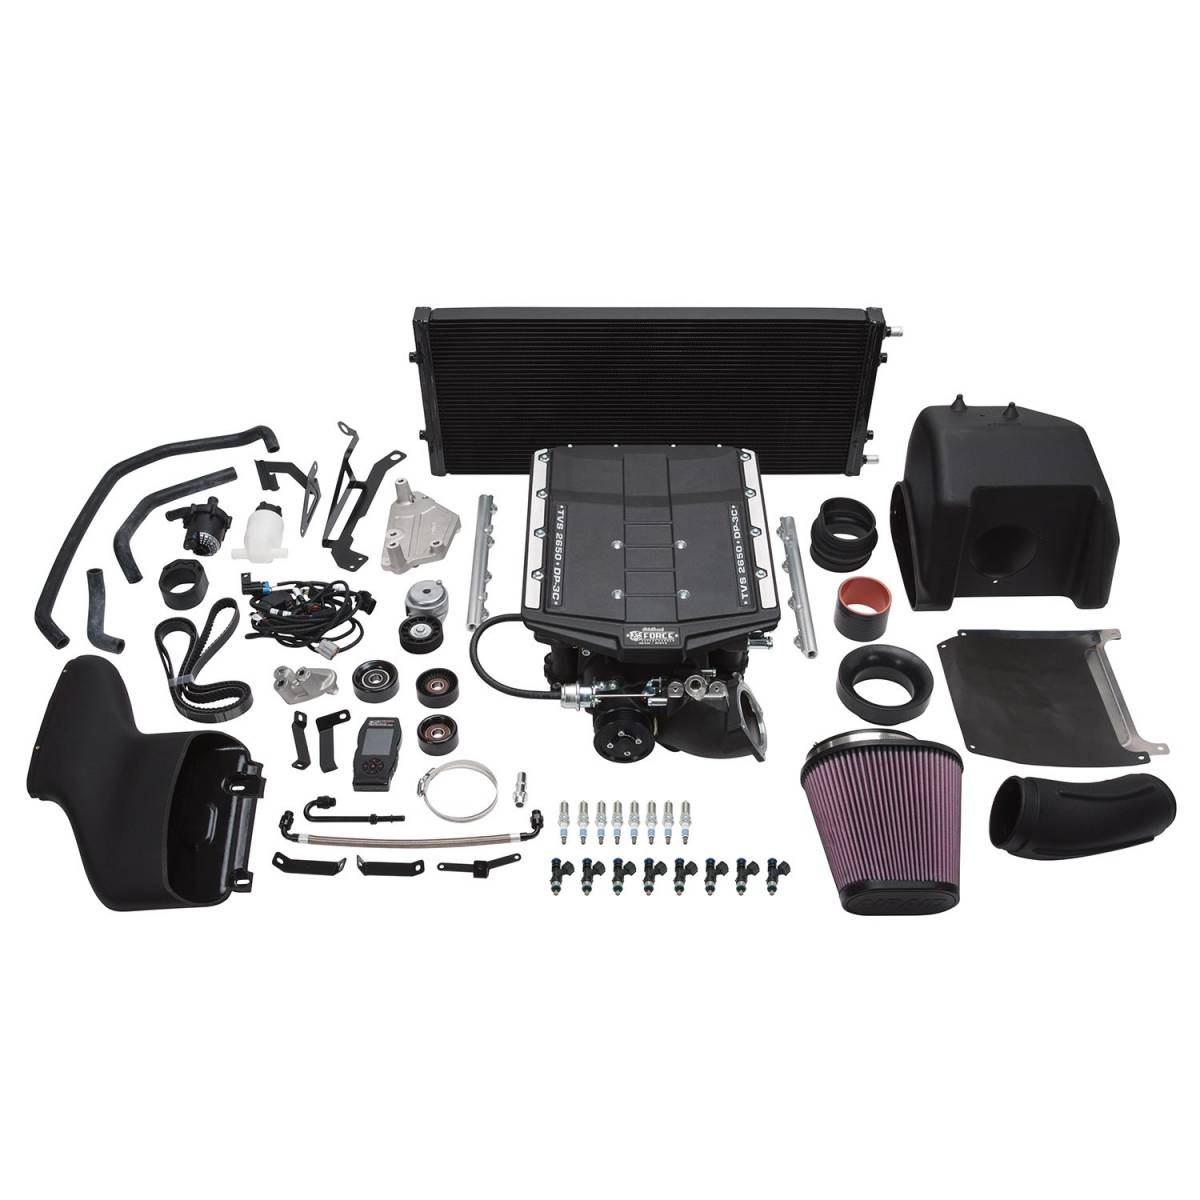 Edelbrock - Ford F-150 Coyote 5.0L 2015-2017 Edelbrock Stage 1 Complete Supercharger Intercooled Kit With Tune - Image 1